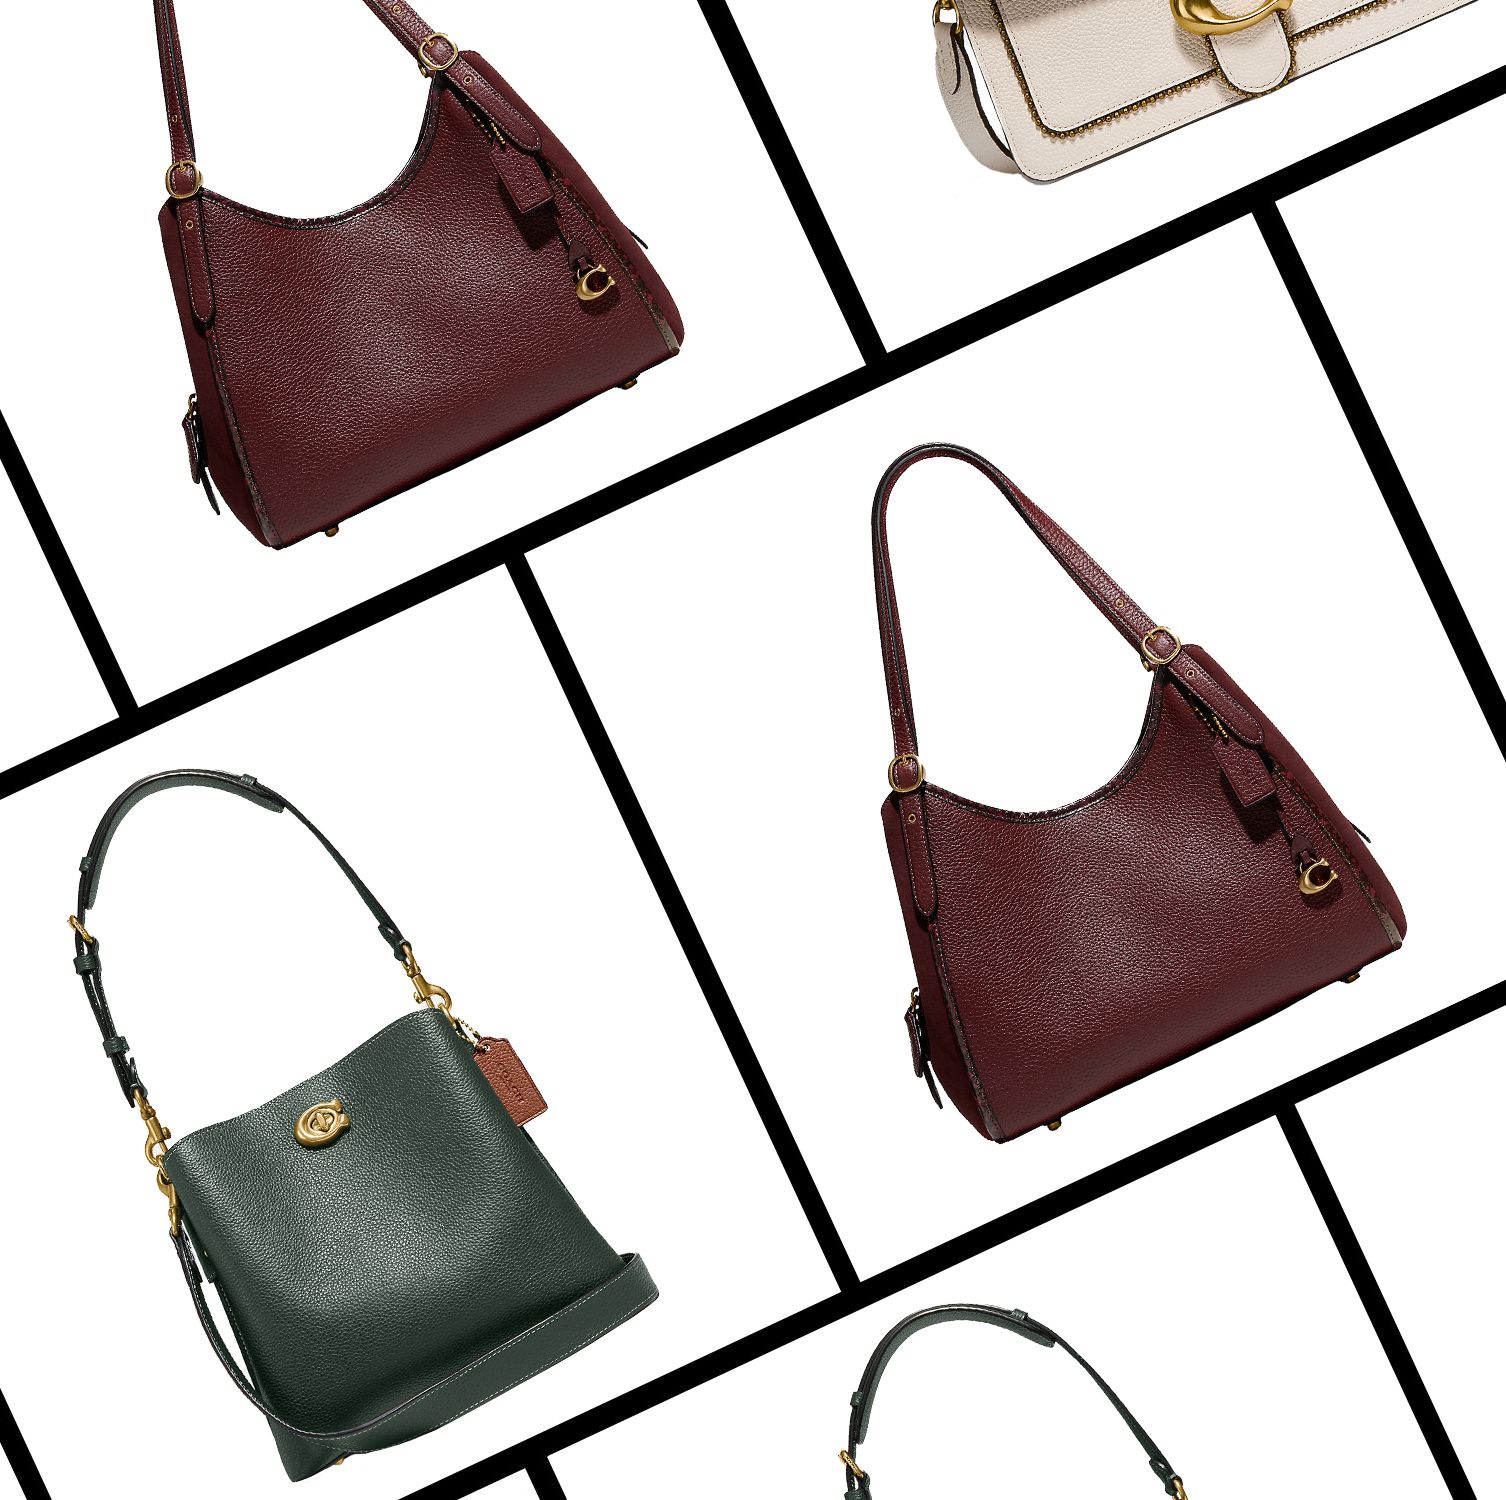 four coach bags on sale to illustrate a coach fall bags sale